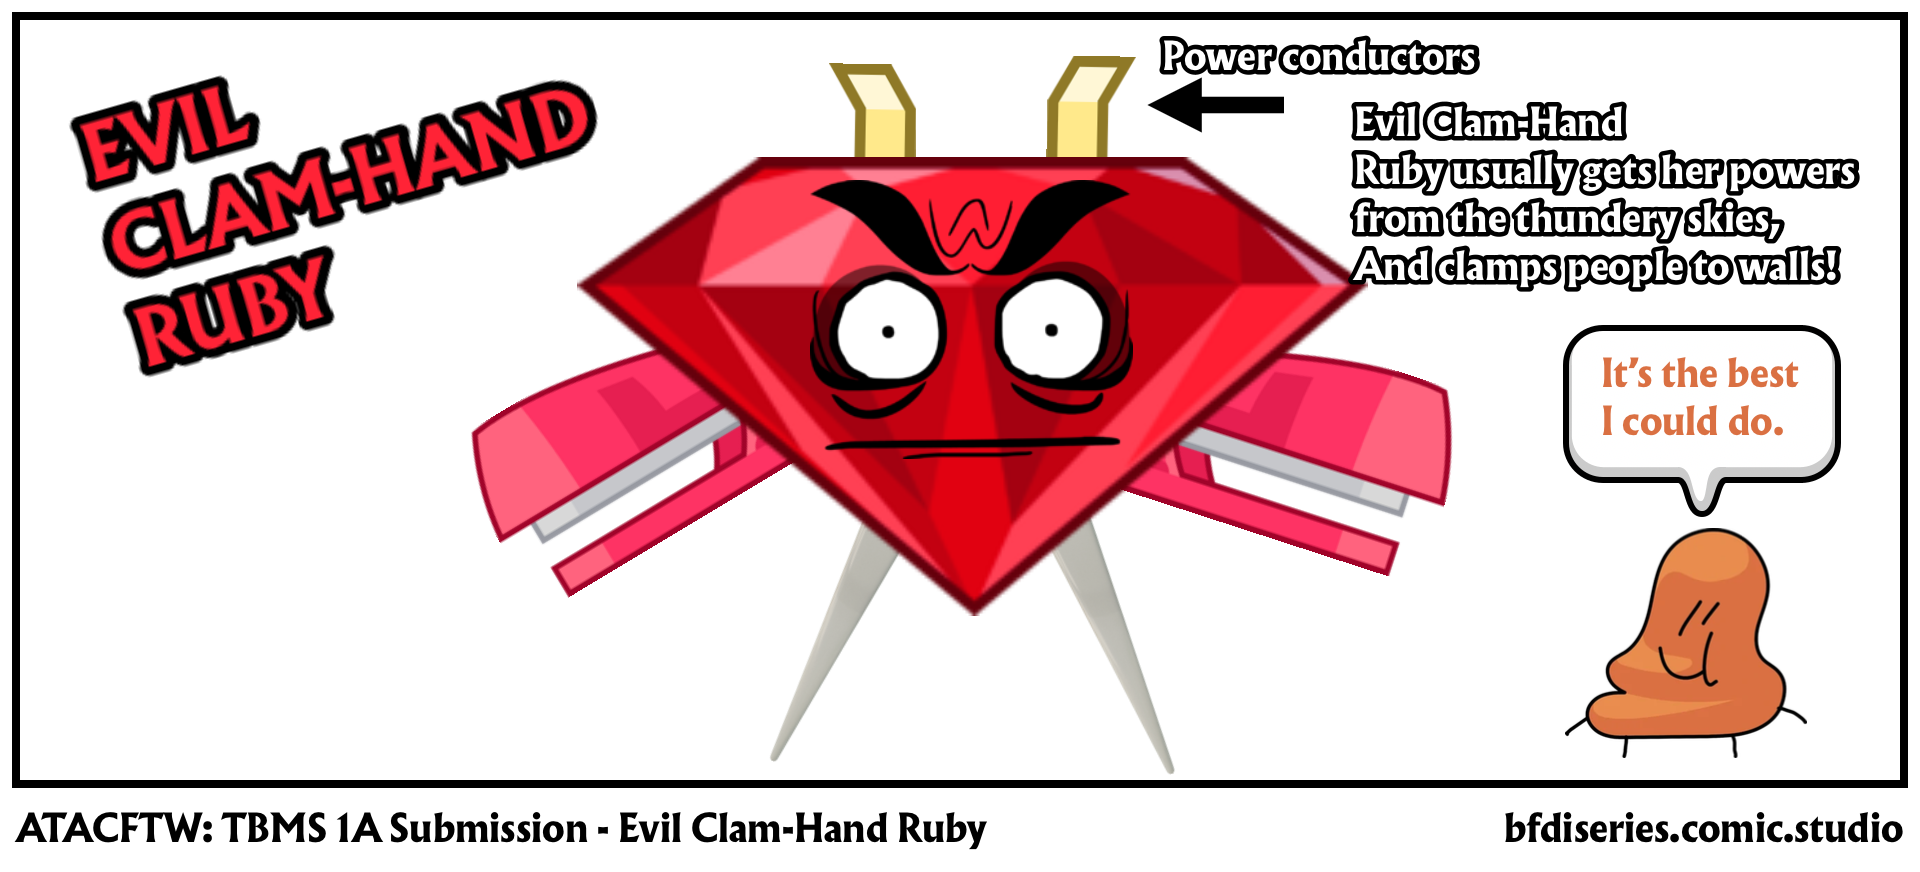 ATACFTW: TBMS 1A Submission - Evil Clam-Hand Ruby